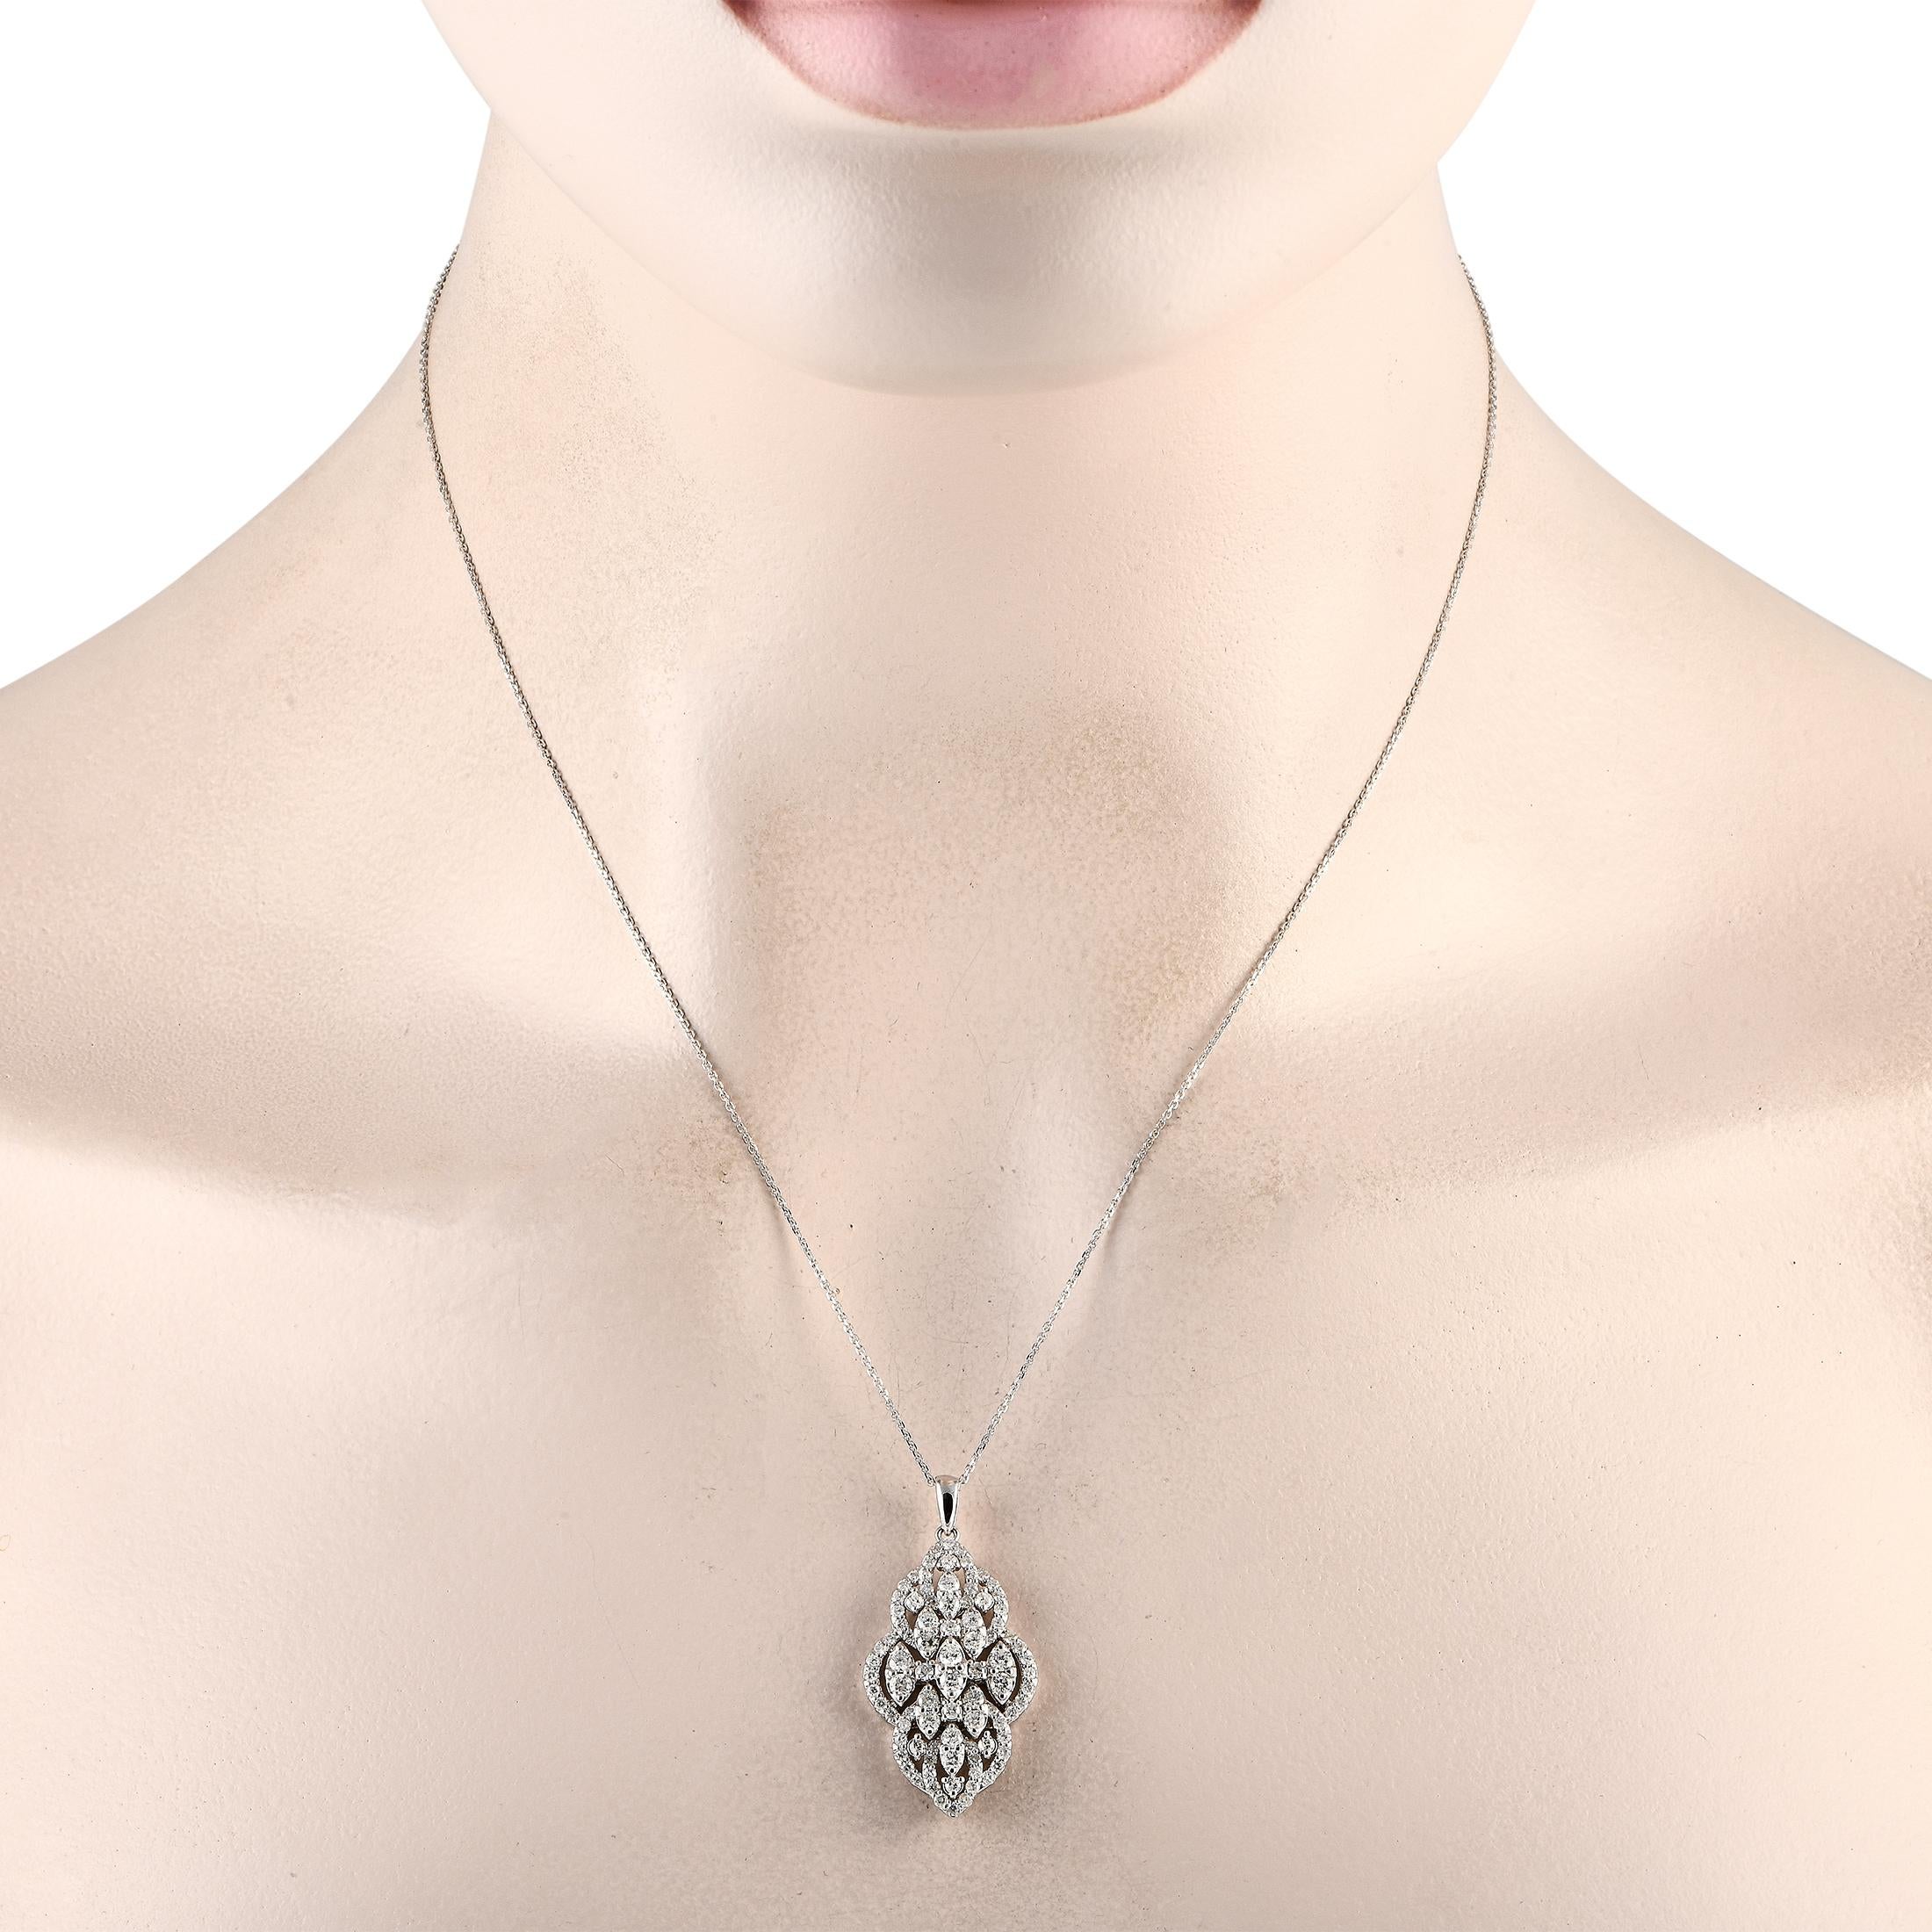 Diamonds with a total weight of 1.50 carats elevate this necklaces intricate 14K White Gold pendant. Equal parts delicate and dynamic in design, the pendant measures 1.5 long by 0.75 wide and is suspended from an 18 chain.This jewelry piece is